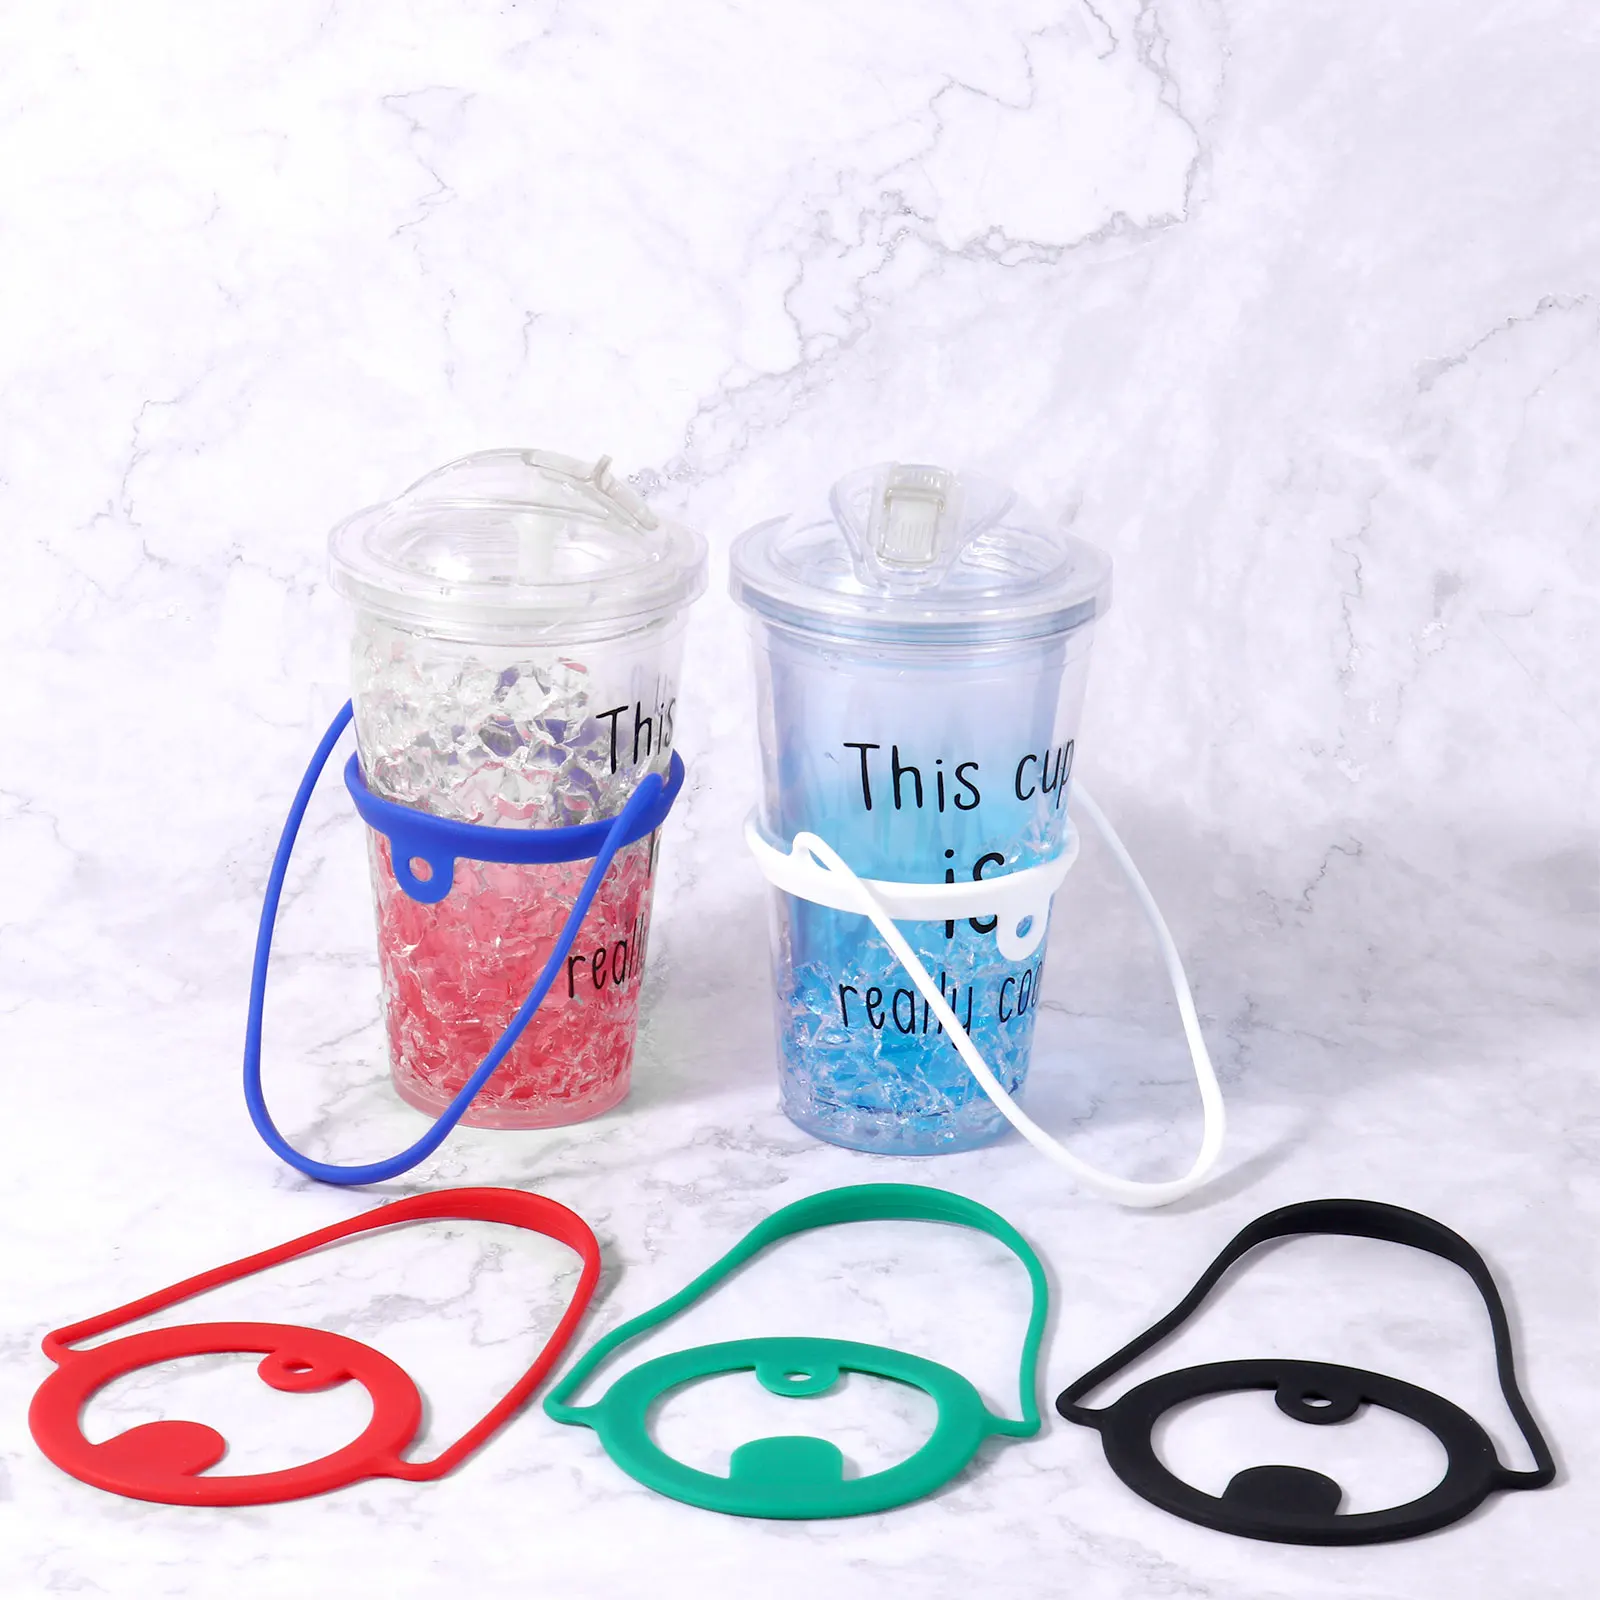 Silicone Portable Reusable Cup Insulated Drink Carrier w/Handle Tie Straw Hole 